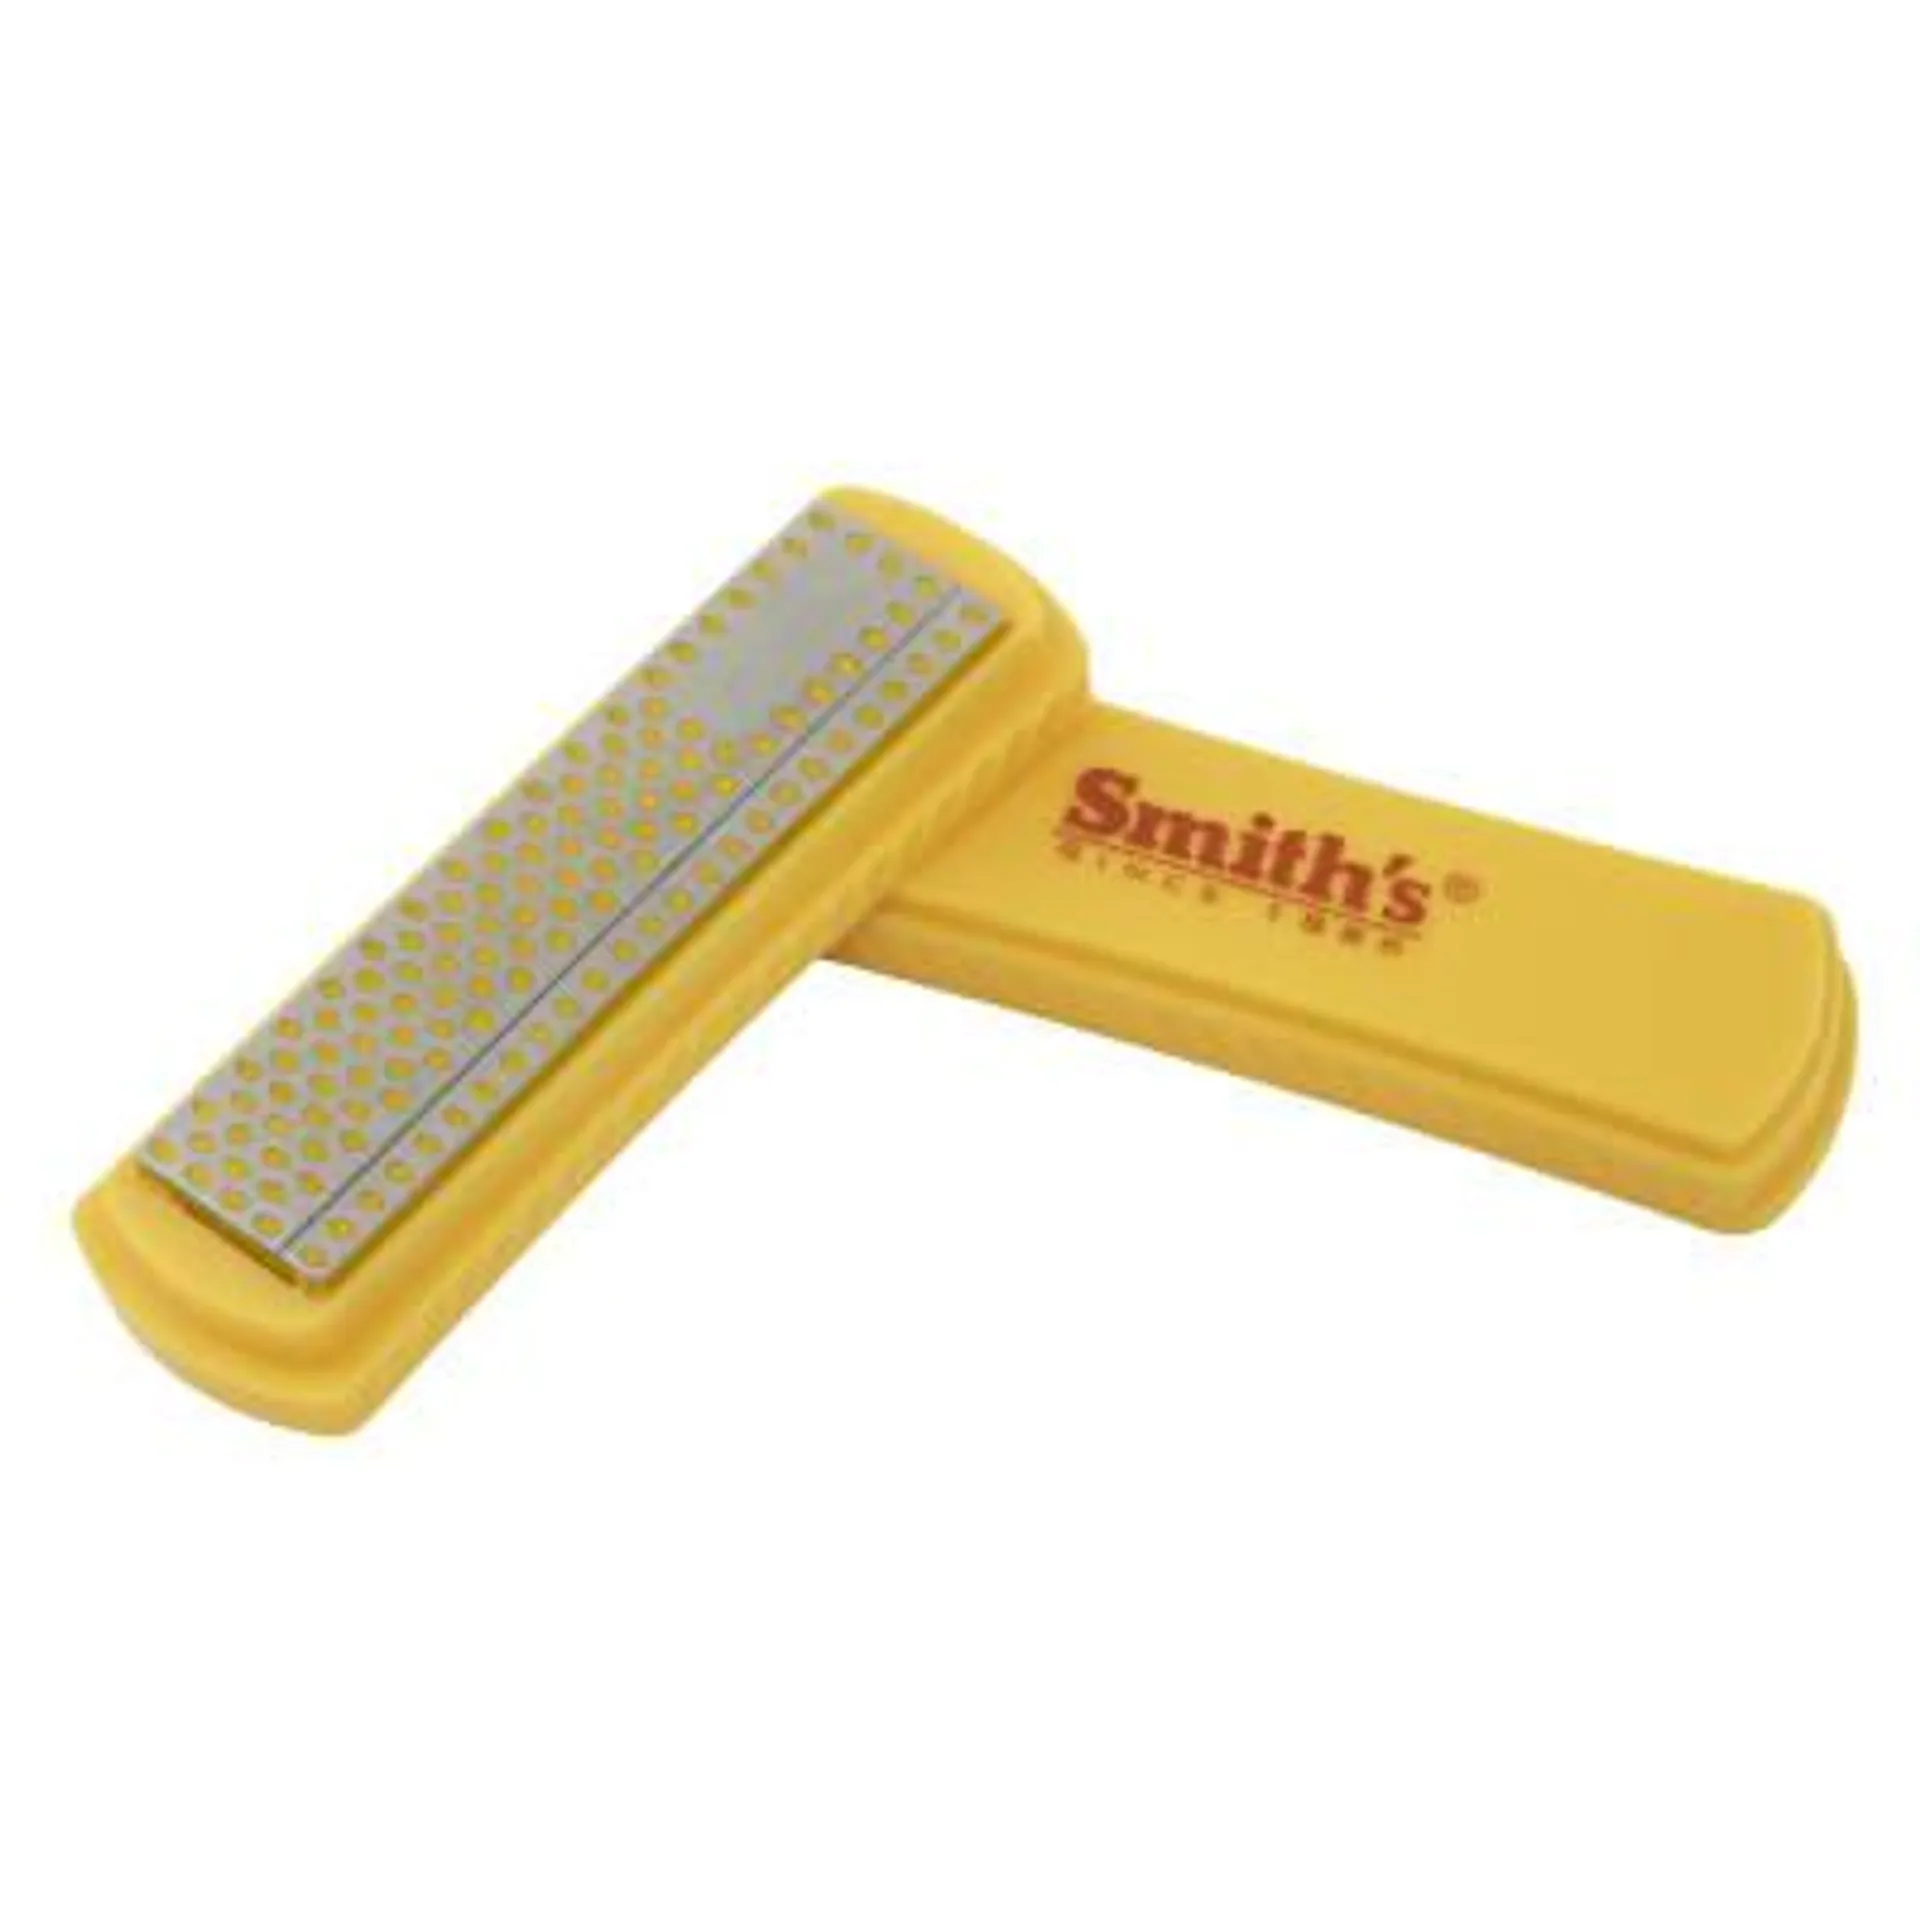 Smith's 4 in Course Diamond Sharpening Stone